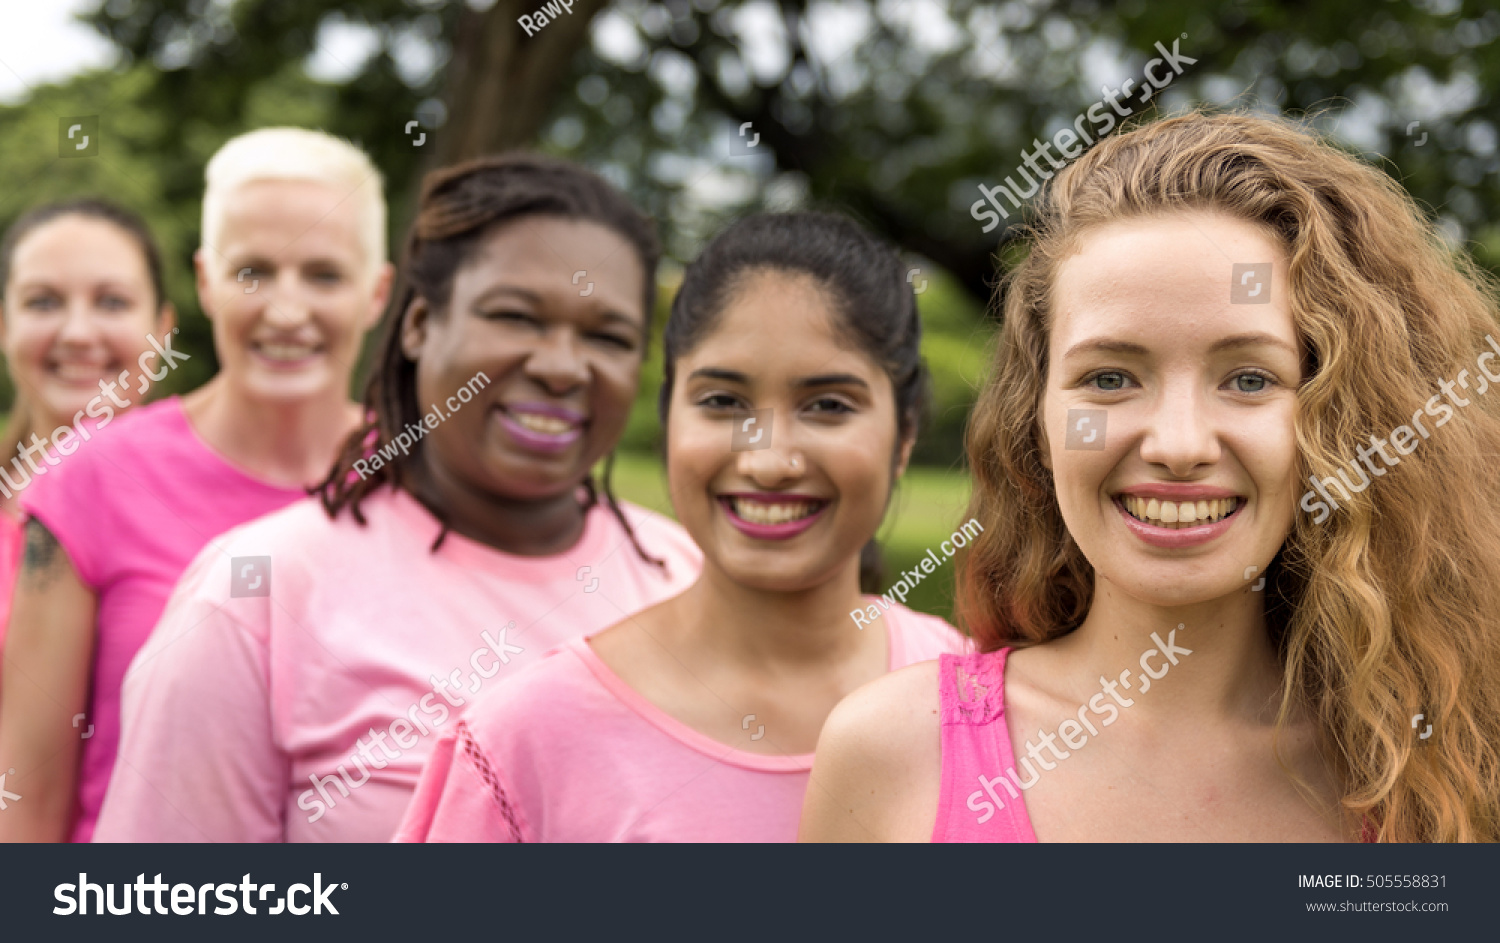 Women Breast Cancer Support Charity Concept #505558831